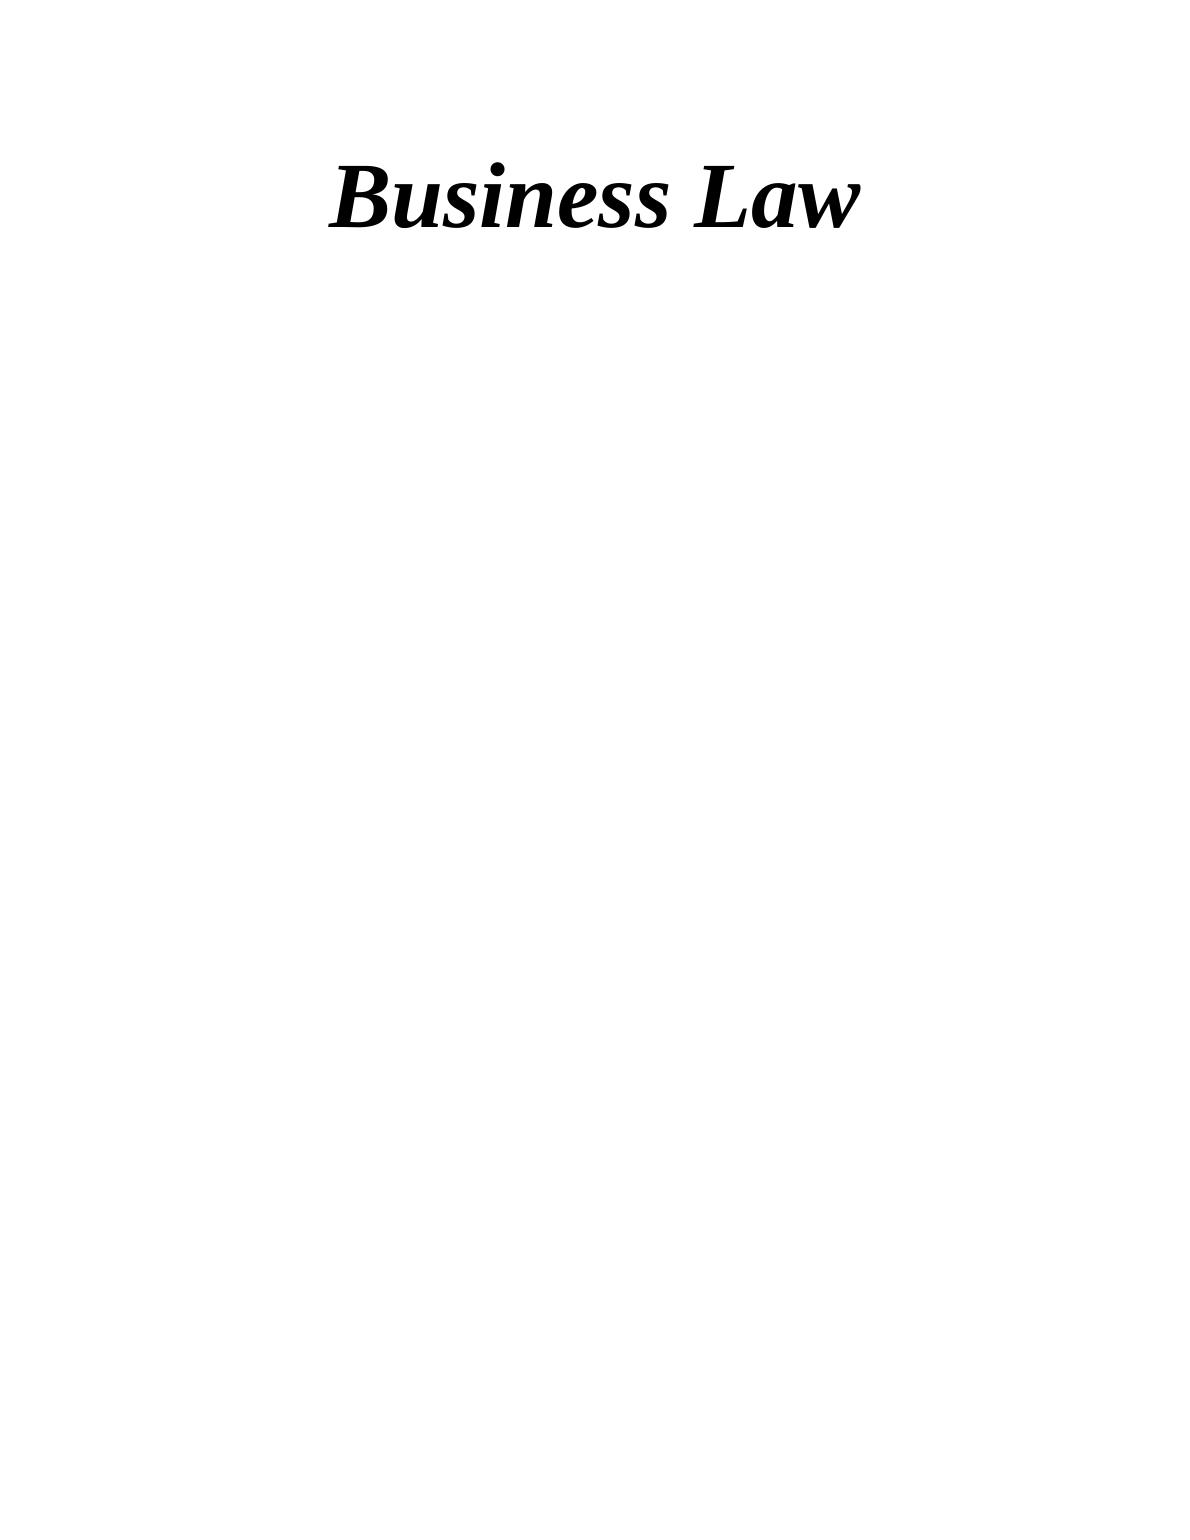 Business Law INTRODUCTION_1